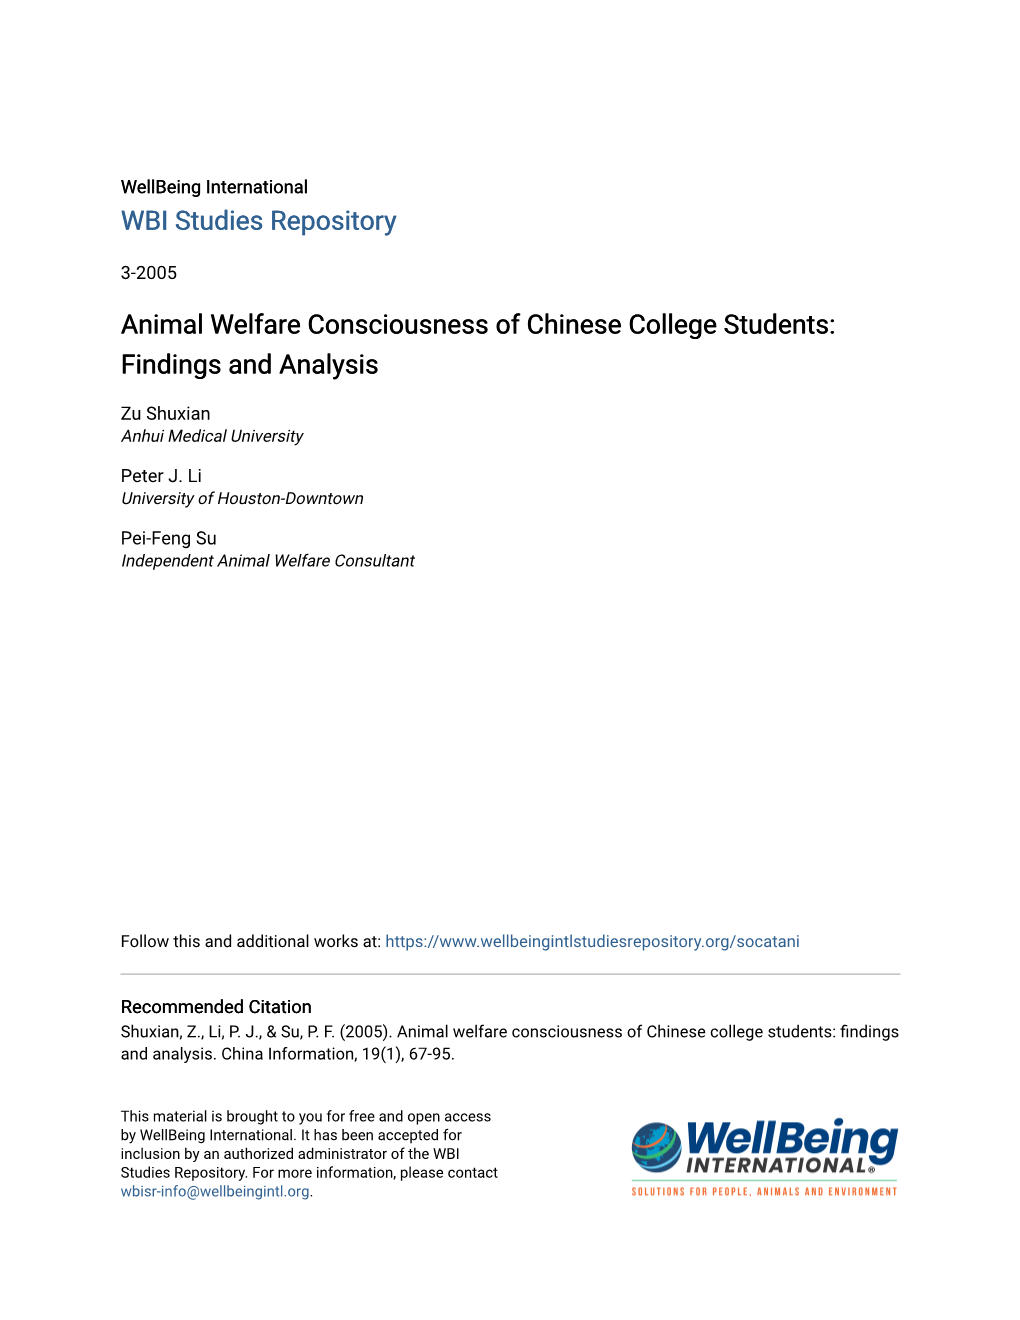 Animal Welfare Consciousness of Chinese College Students: Findings and Analysis